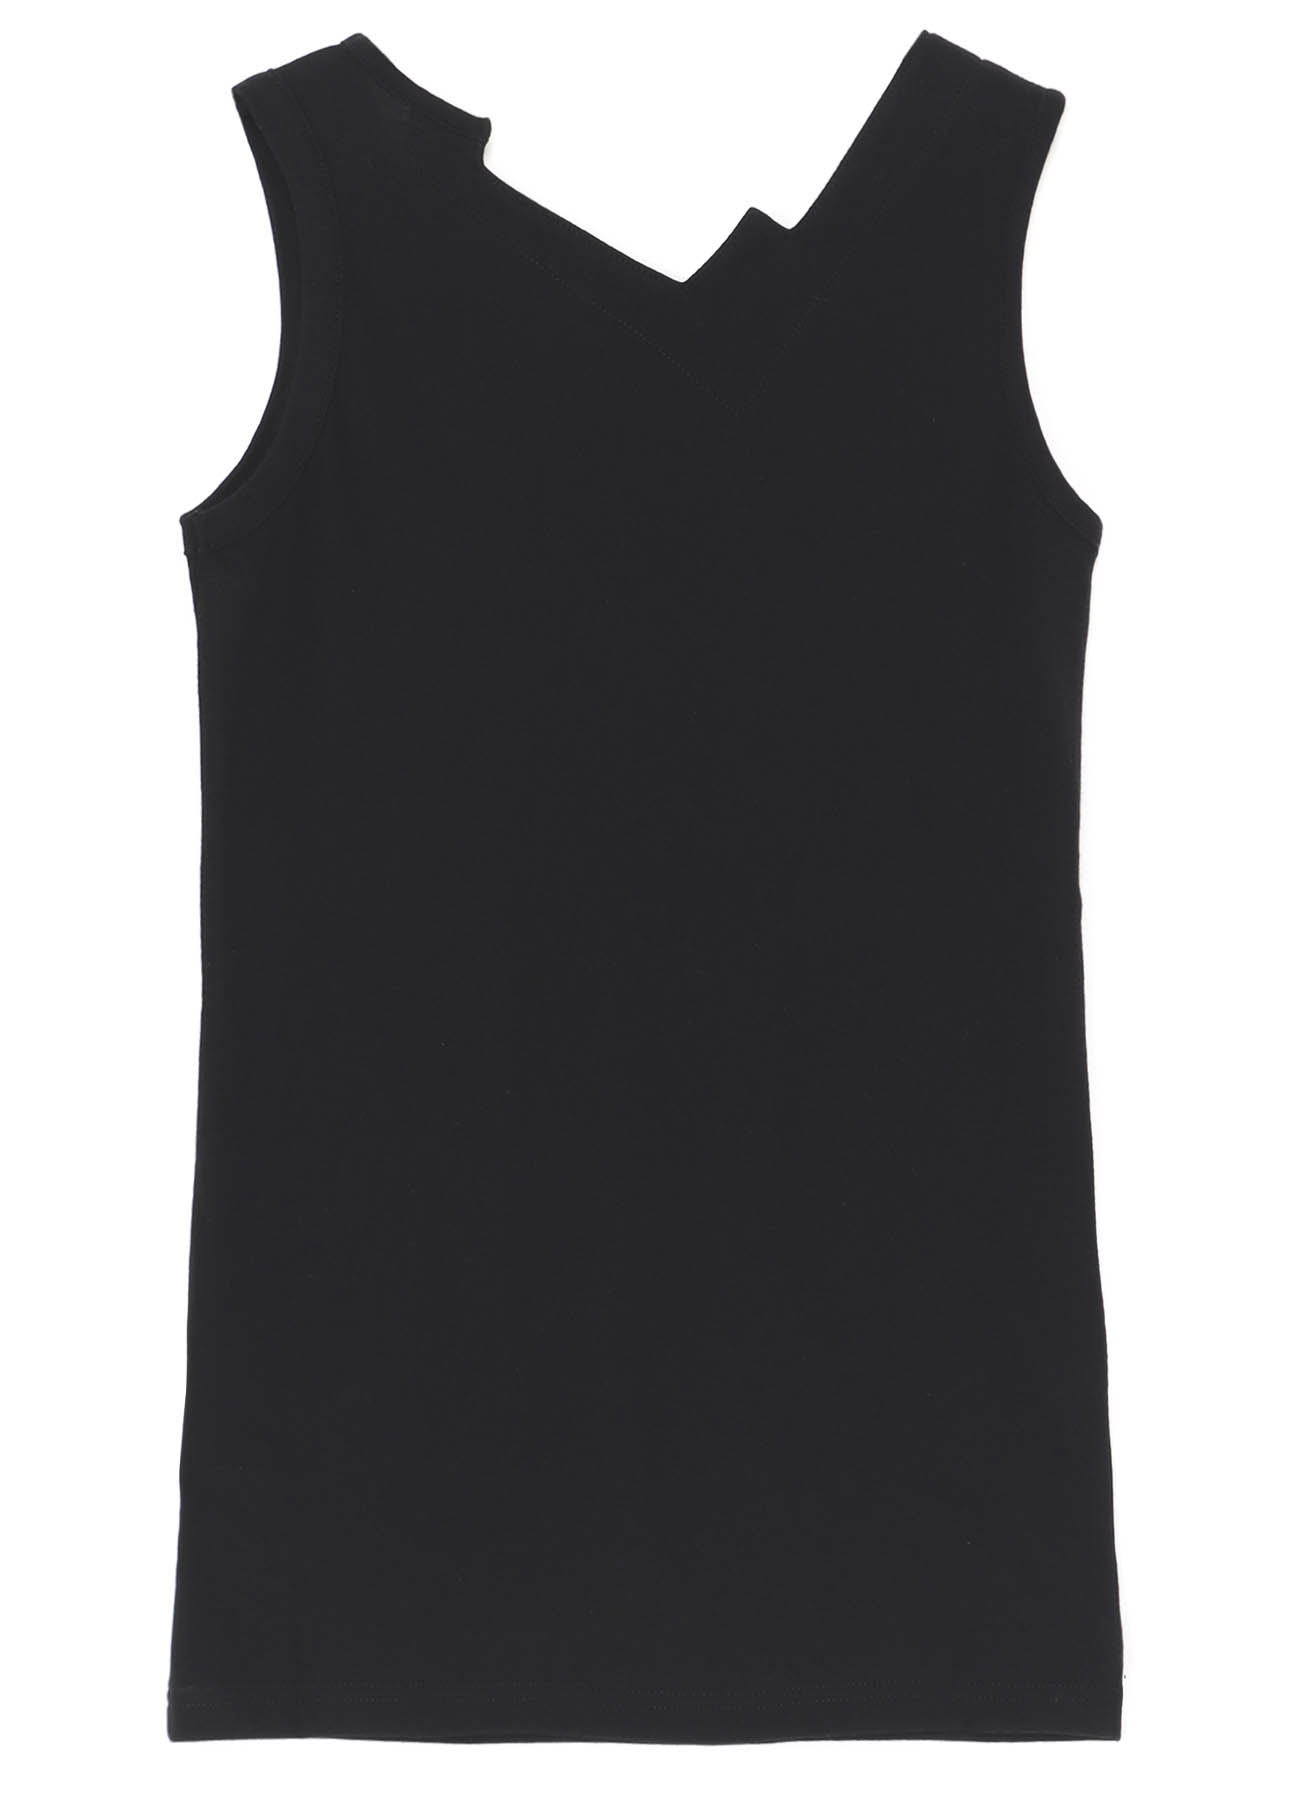 LOW TENSION SINGLE JERSEY collections ZIGZAG TANK TOP